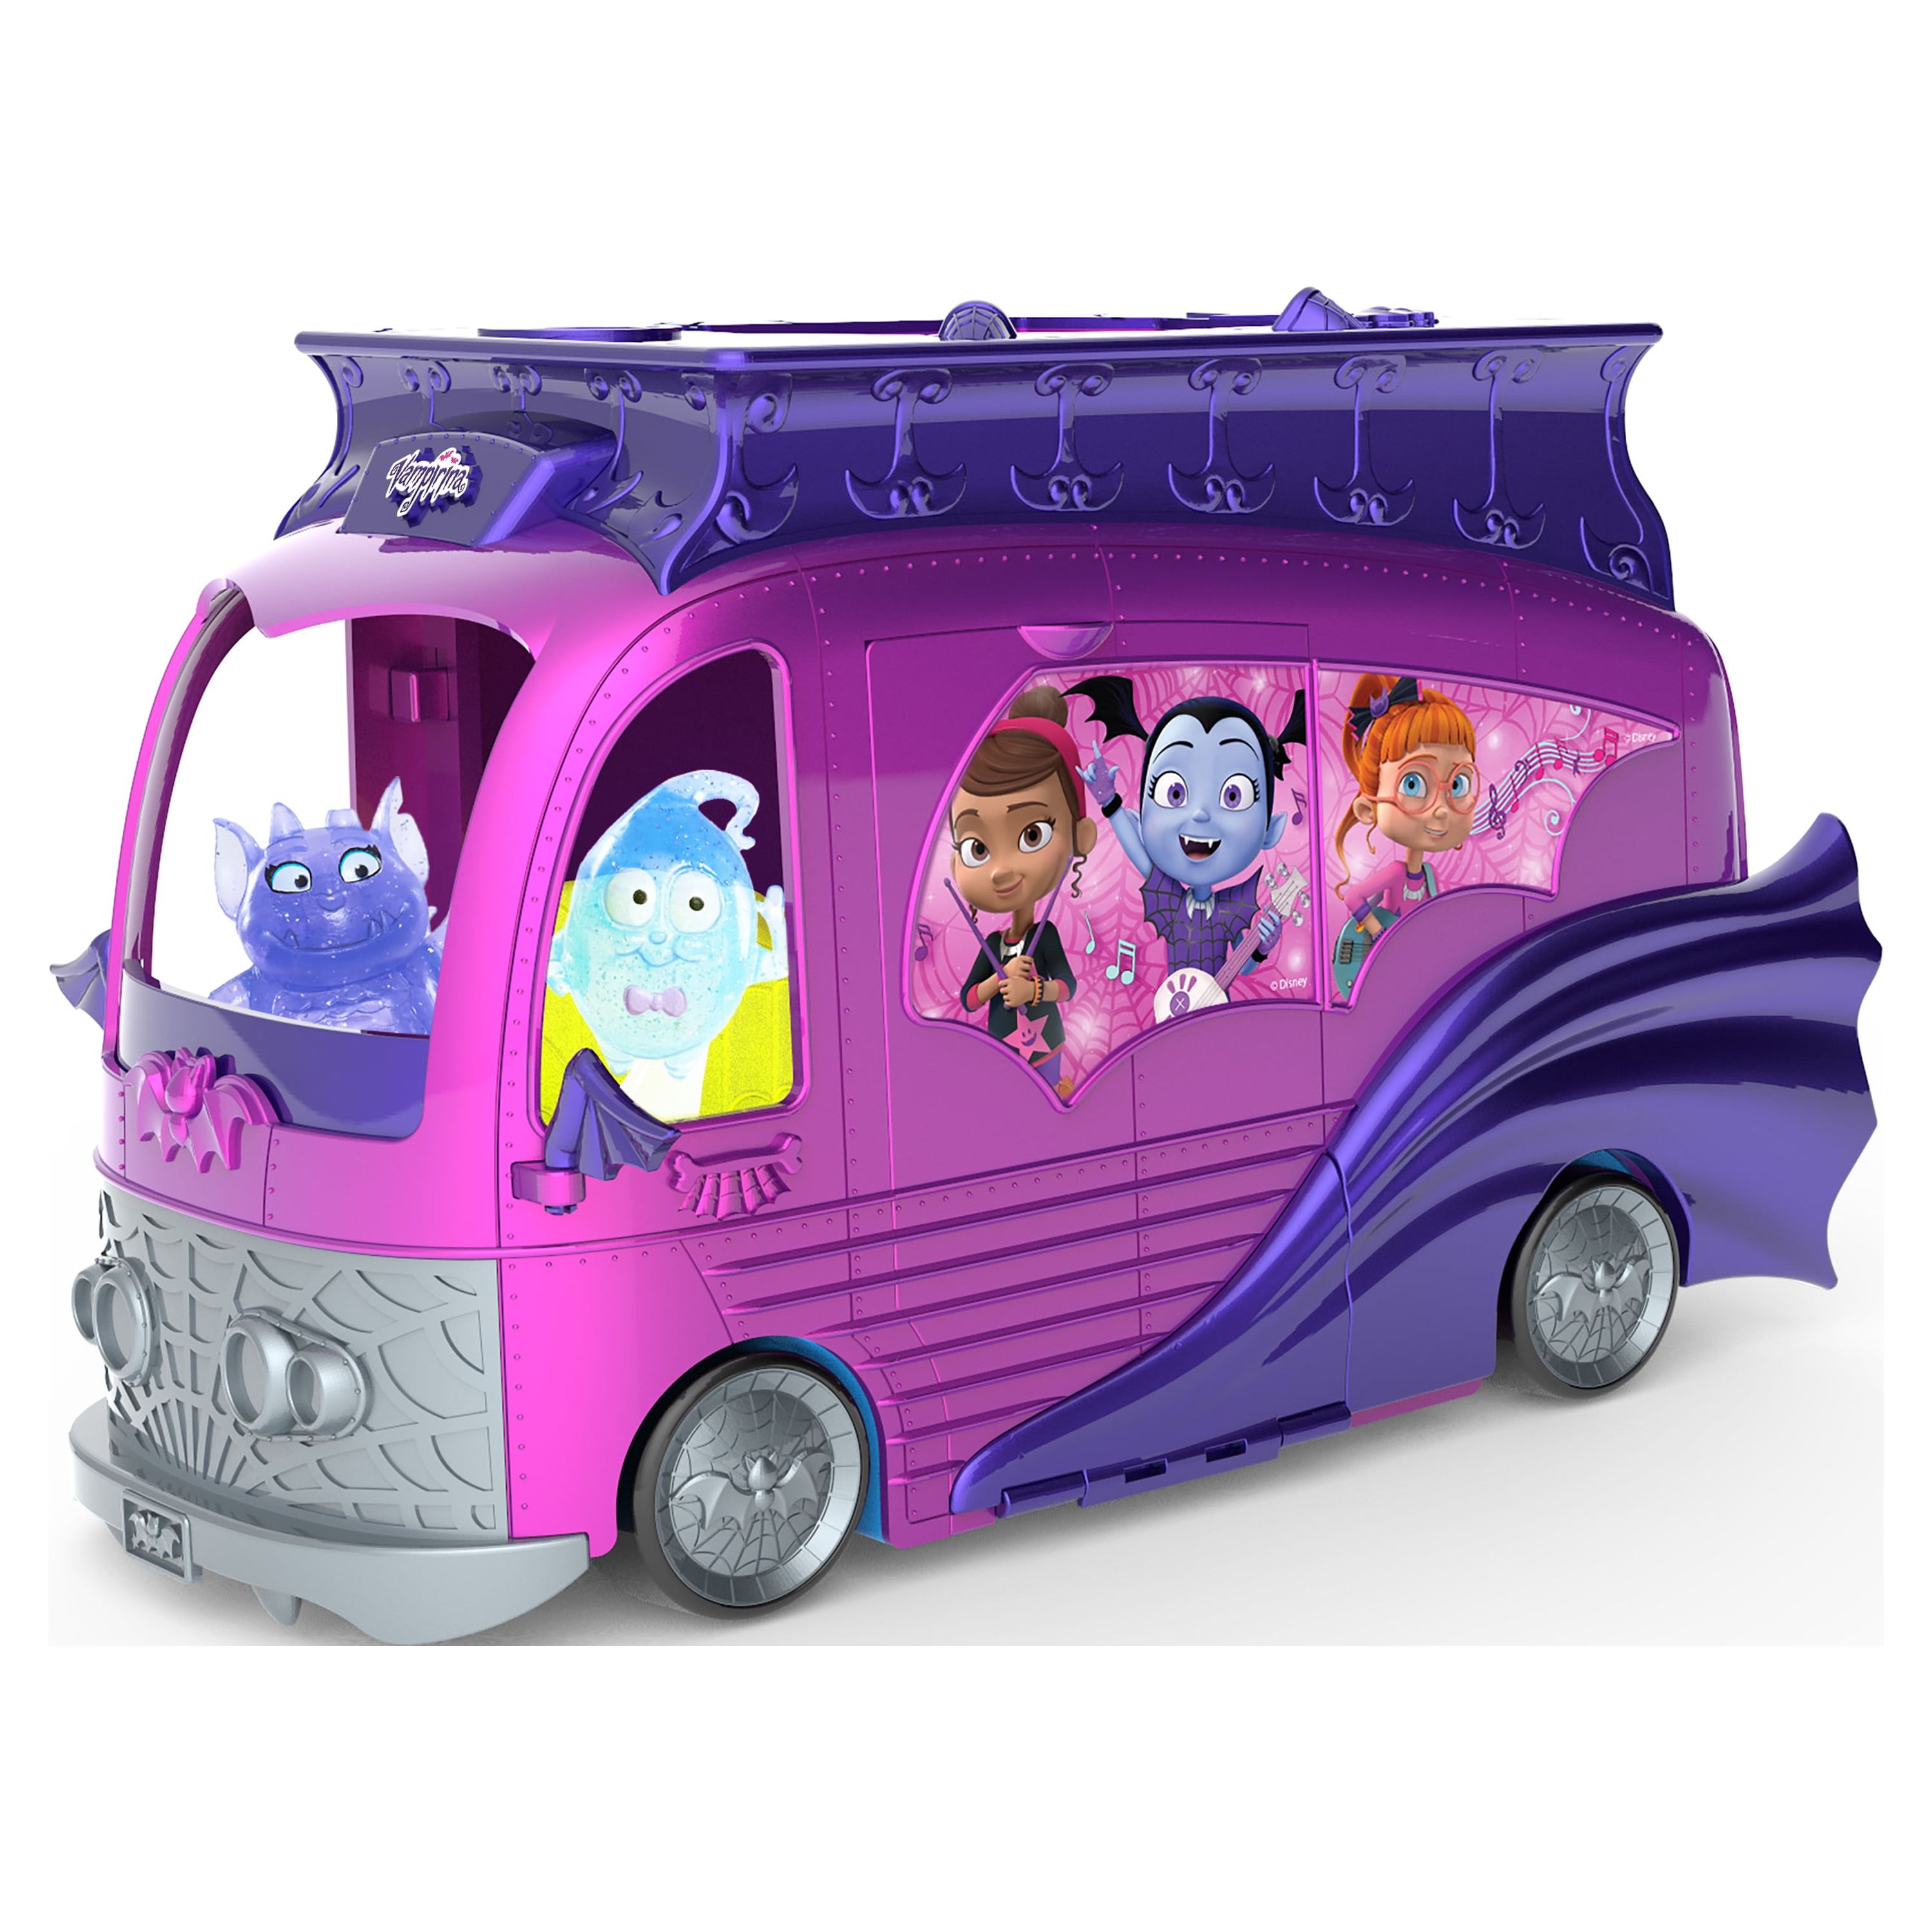 Vampirina Rock N' Jam Touring Van, Officially Licensed Kids Toys for Ages 3 Up, Gifts and Presents - image 2 of 2